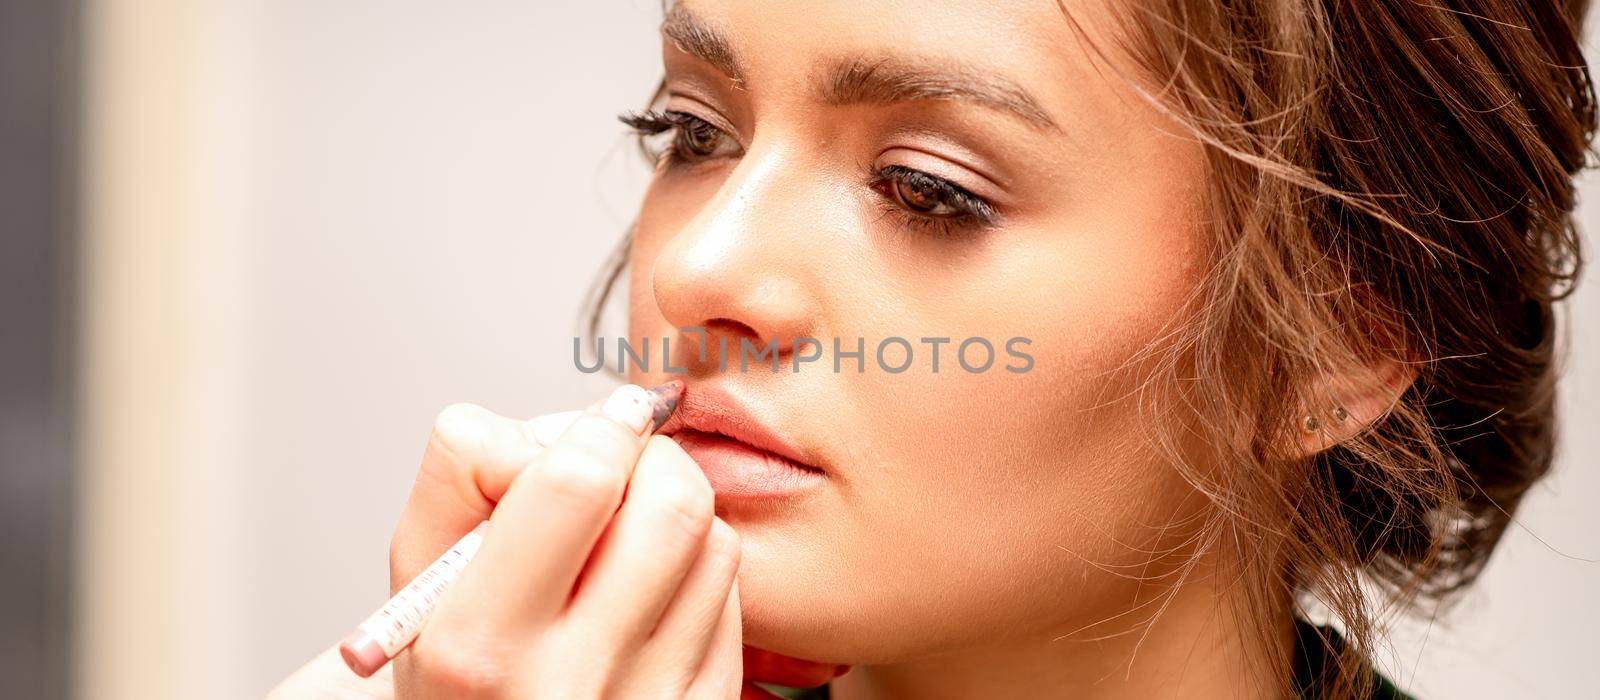 Lips makeup. Makeup artist applies contour with a pencil to the lips of a young woman in a beauty salon. by okskukuruza